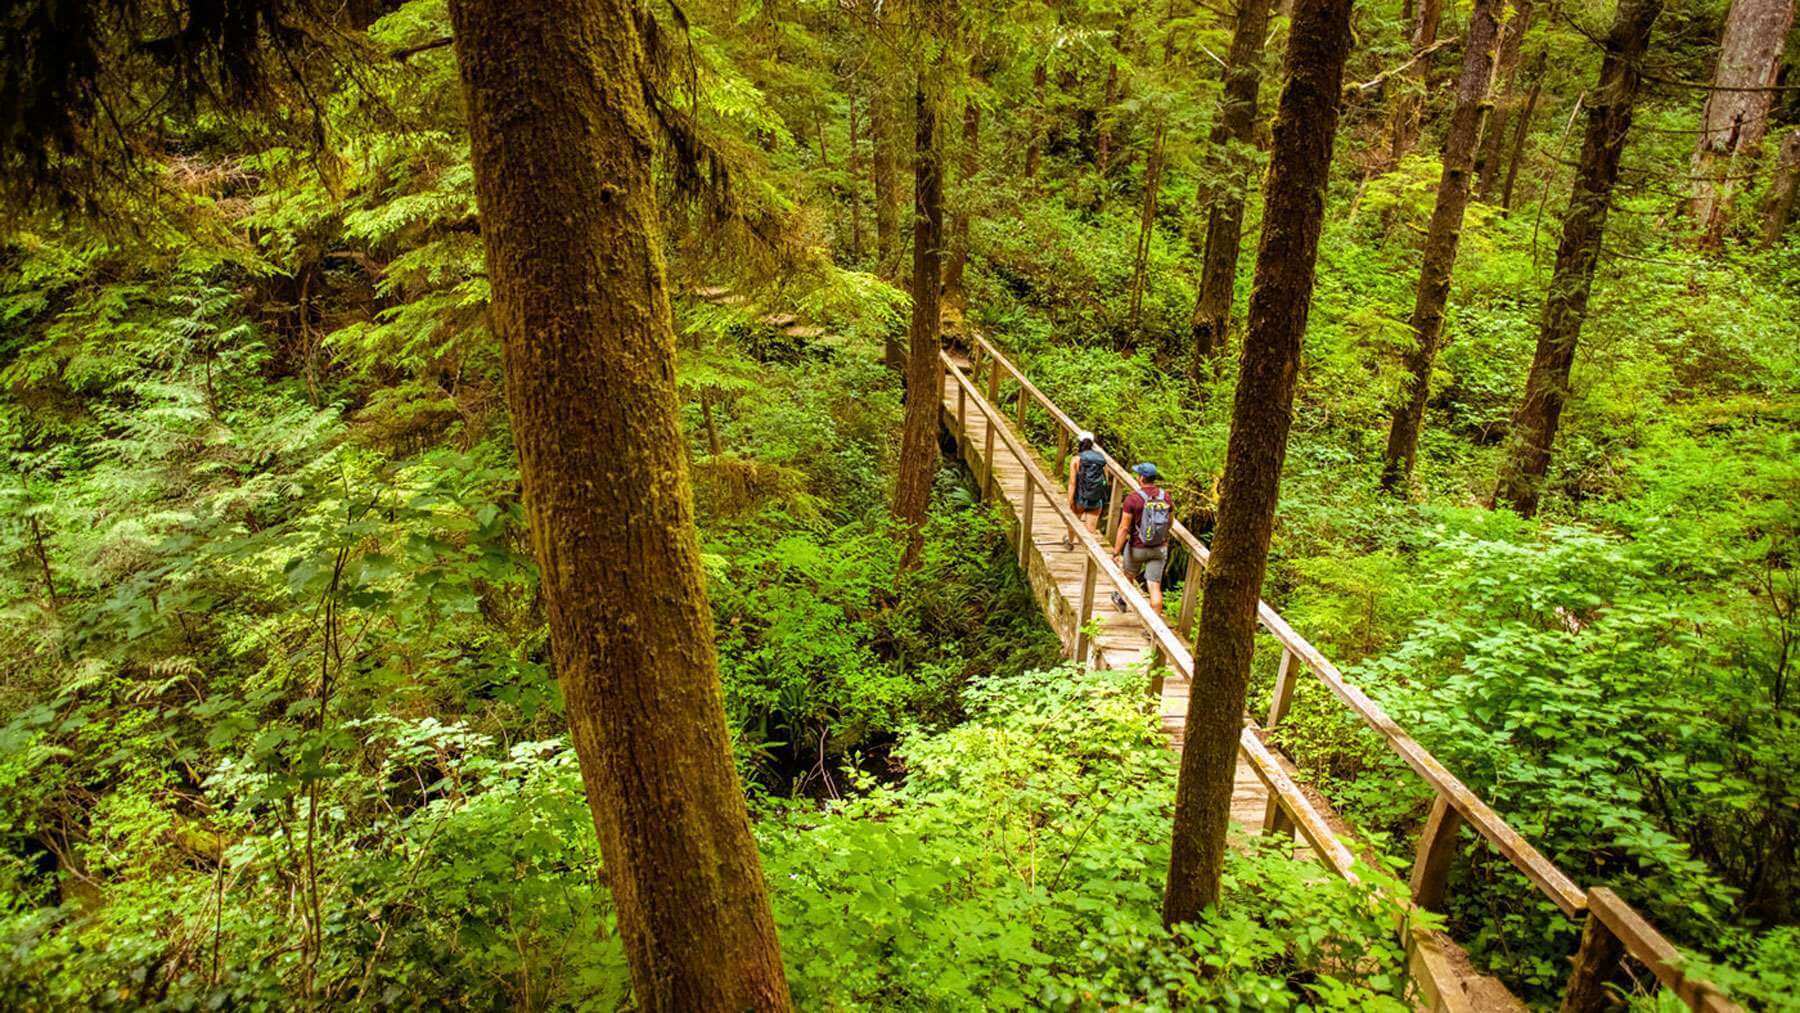 Two people standing on a wooden bridge in the middle of a lush green forest